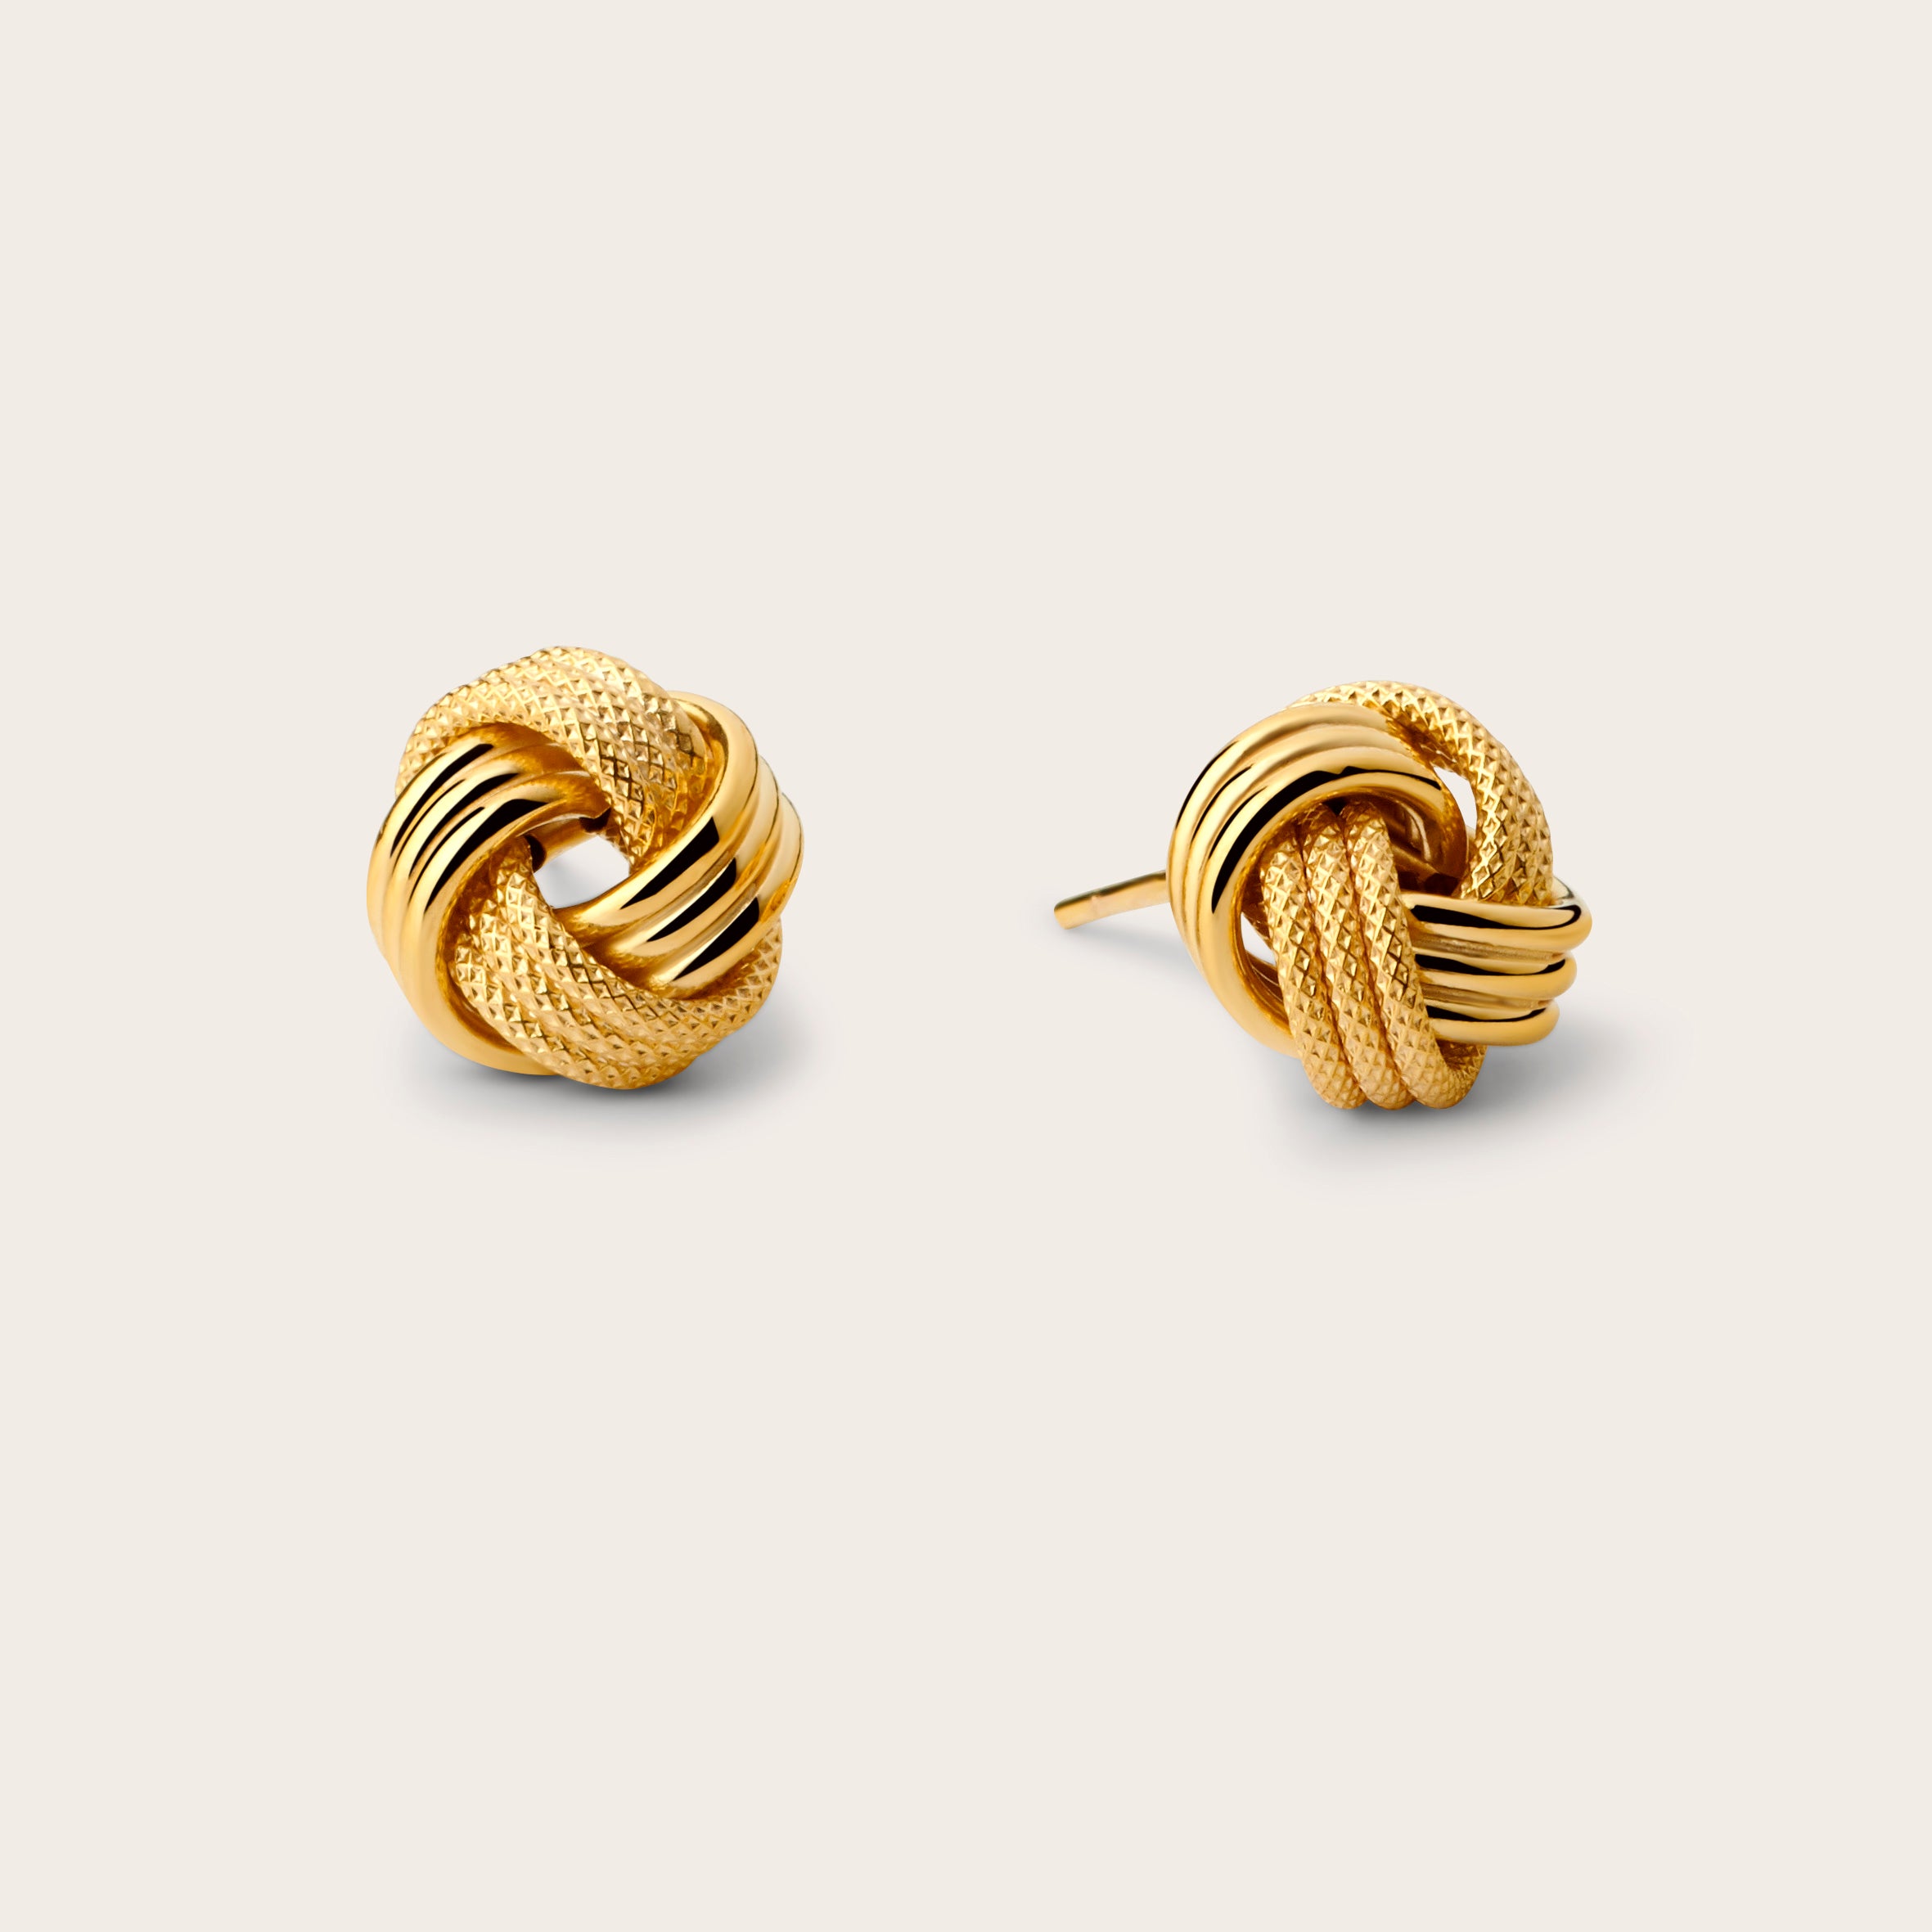 Love Knot Stud Earrings in Matte and High Polish